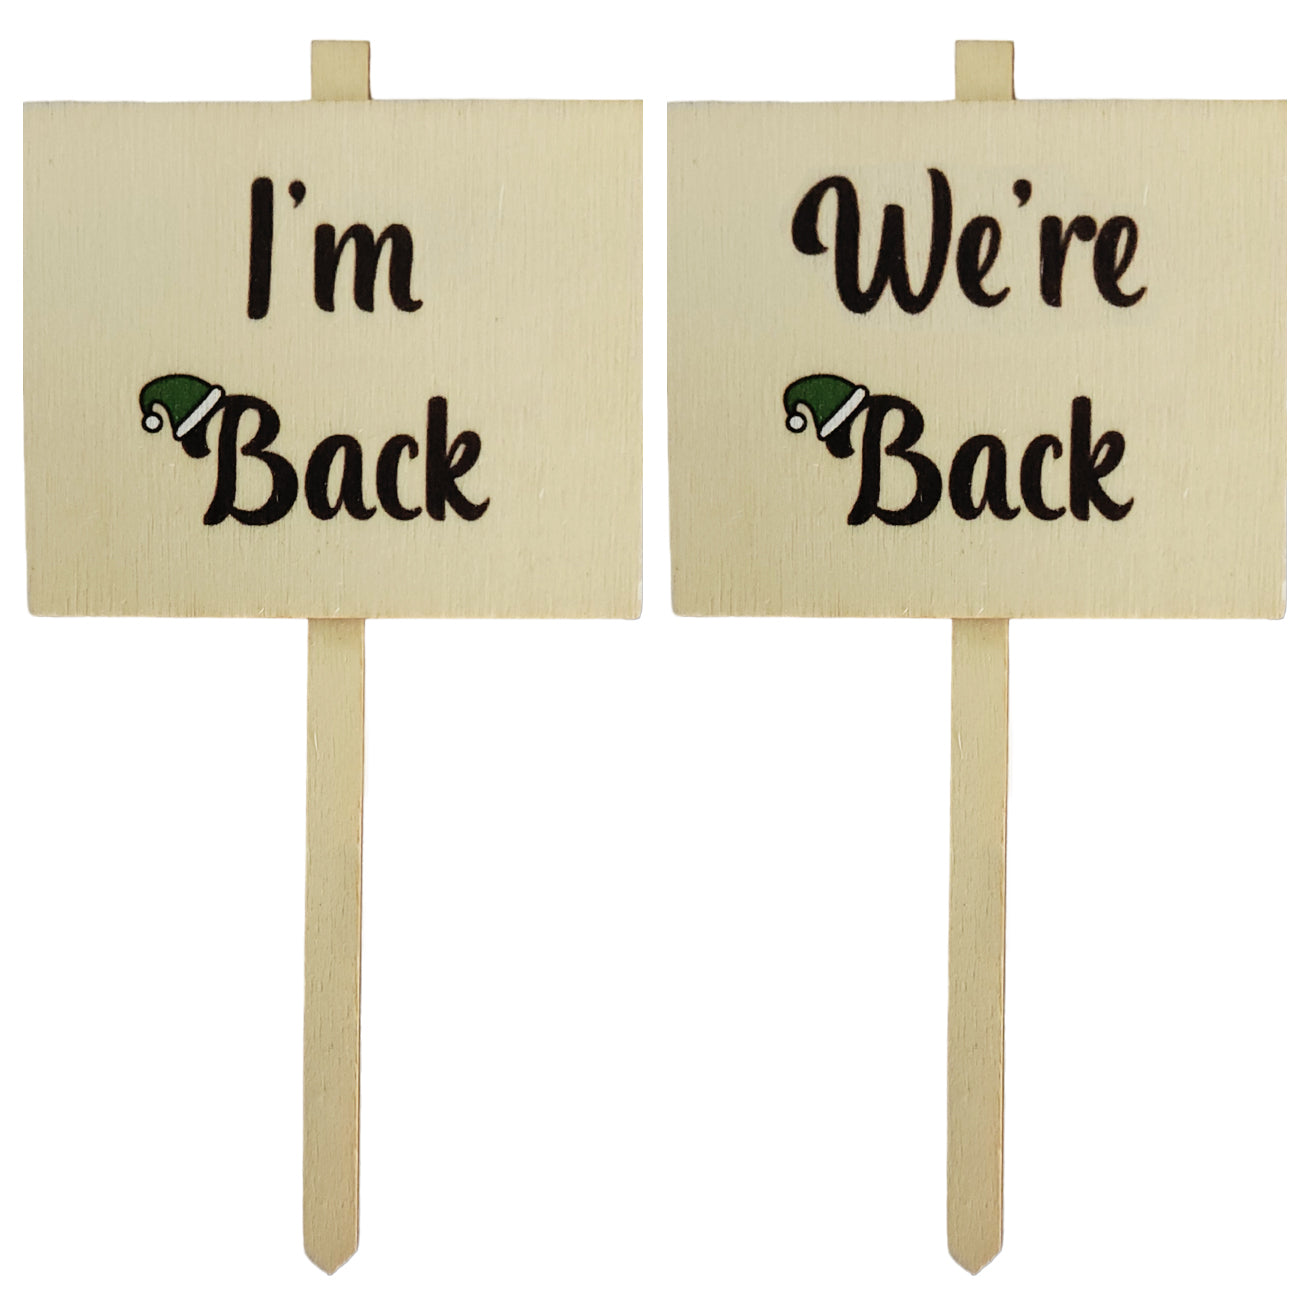 Welcome back signs for elves arrival ideas